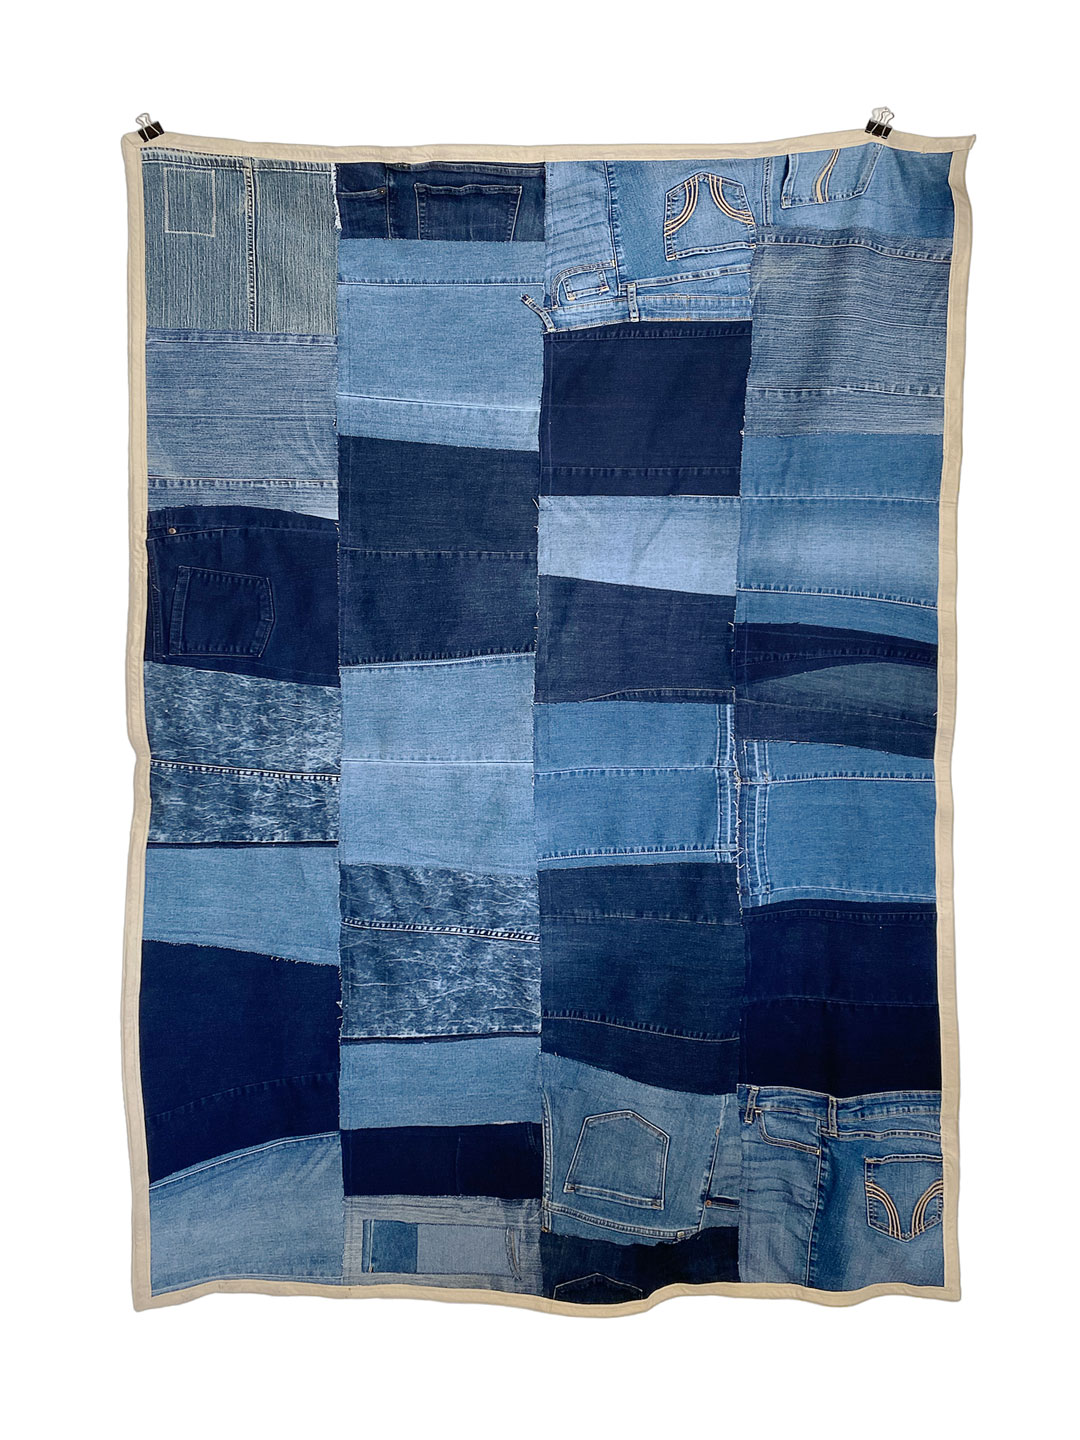 My neighbors' jeans - a picnic blanket textile art piece by Liz Broekhuyse